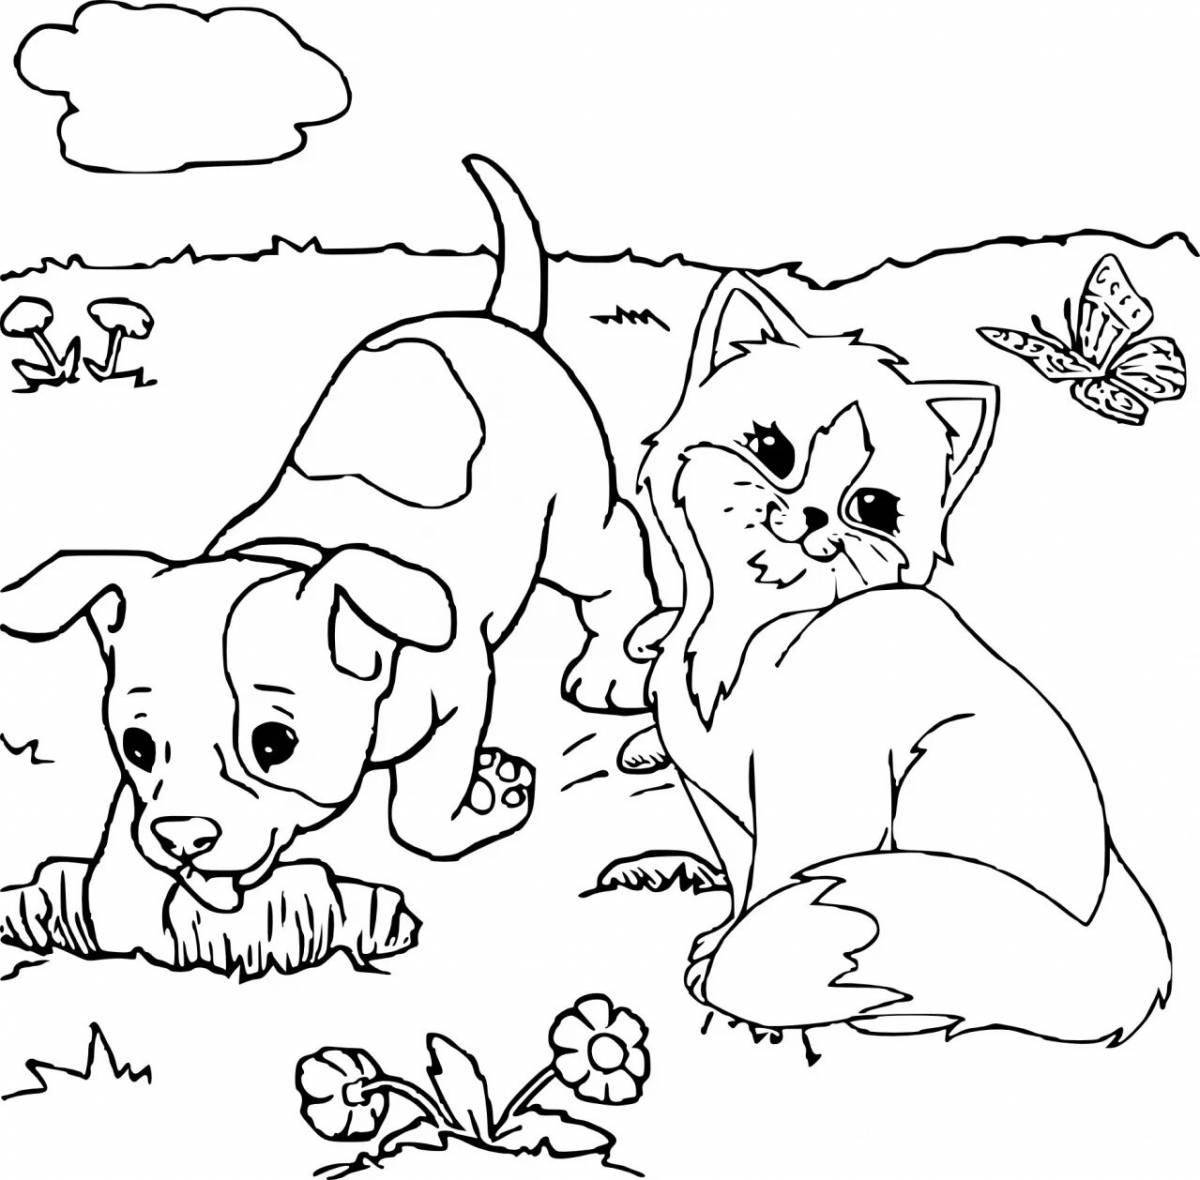 Colorful cute cats and dogs coloring page